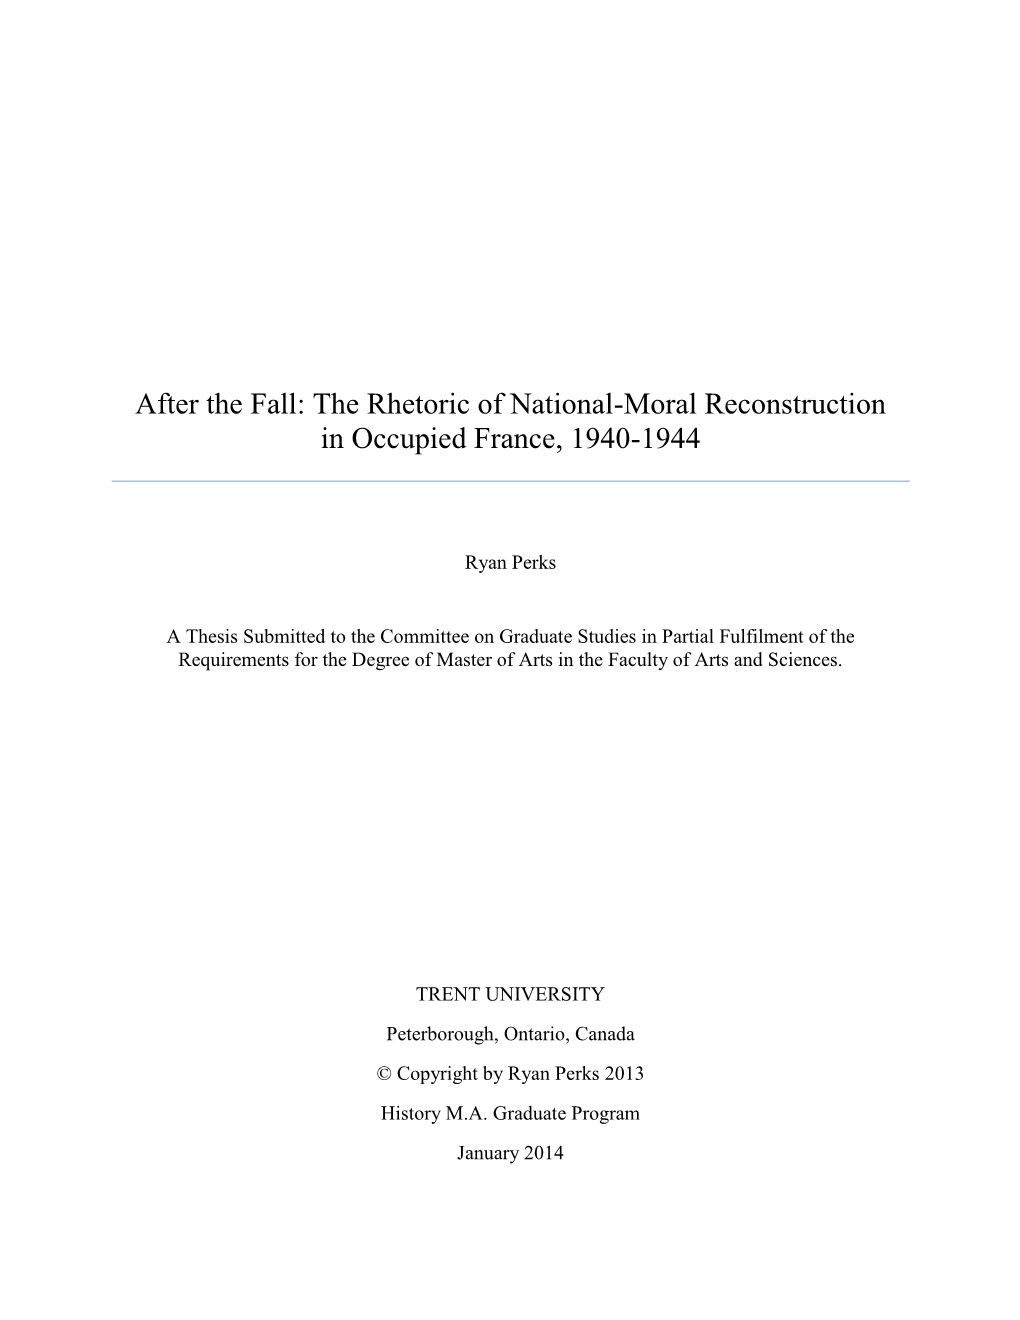 The Rhetoric of National-Moral Reconstruction in Occupied France, 1940-1944